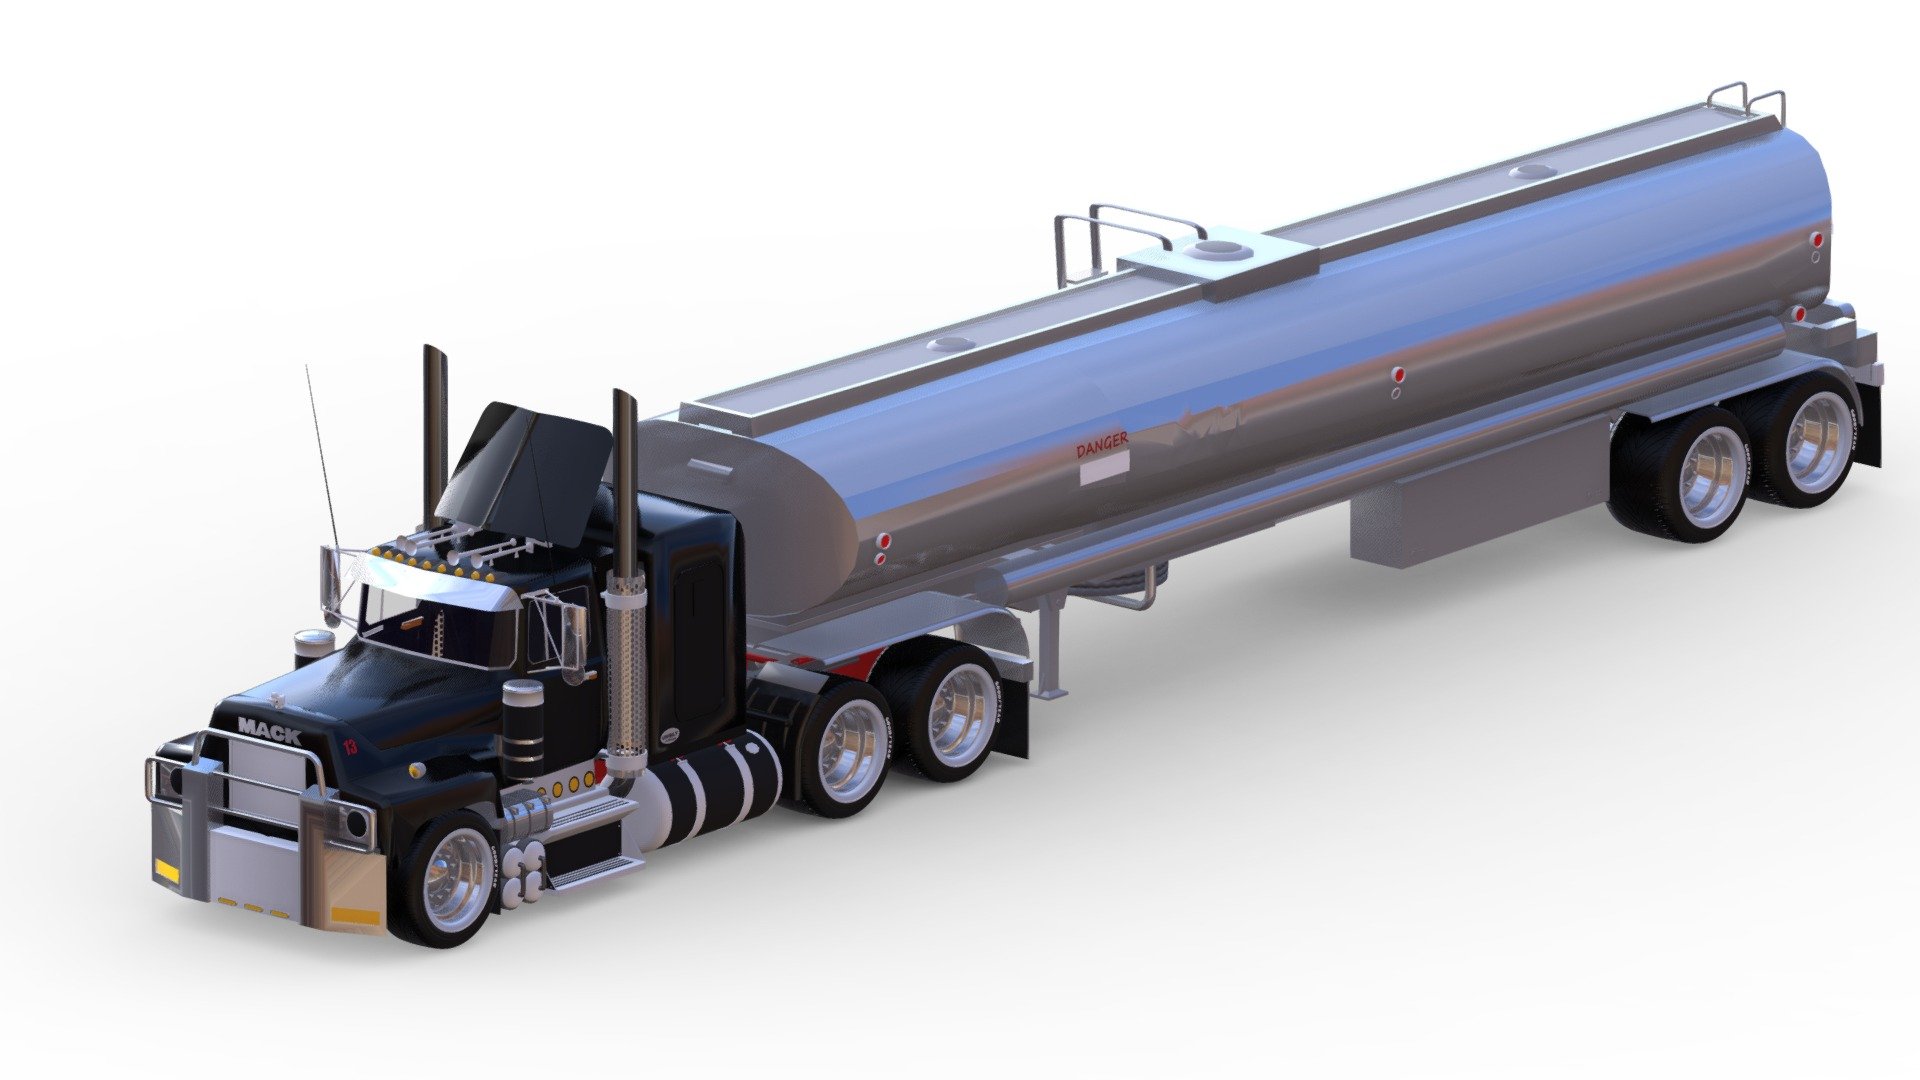 This high-quality 3D model depicts a realistic tanker truck, perfect for use in visualizations, simulations, and games. The model is detailed and accurately textured, making it suitable for close-up renders 3d model